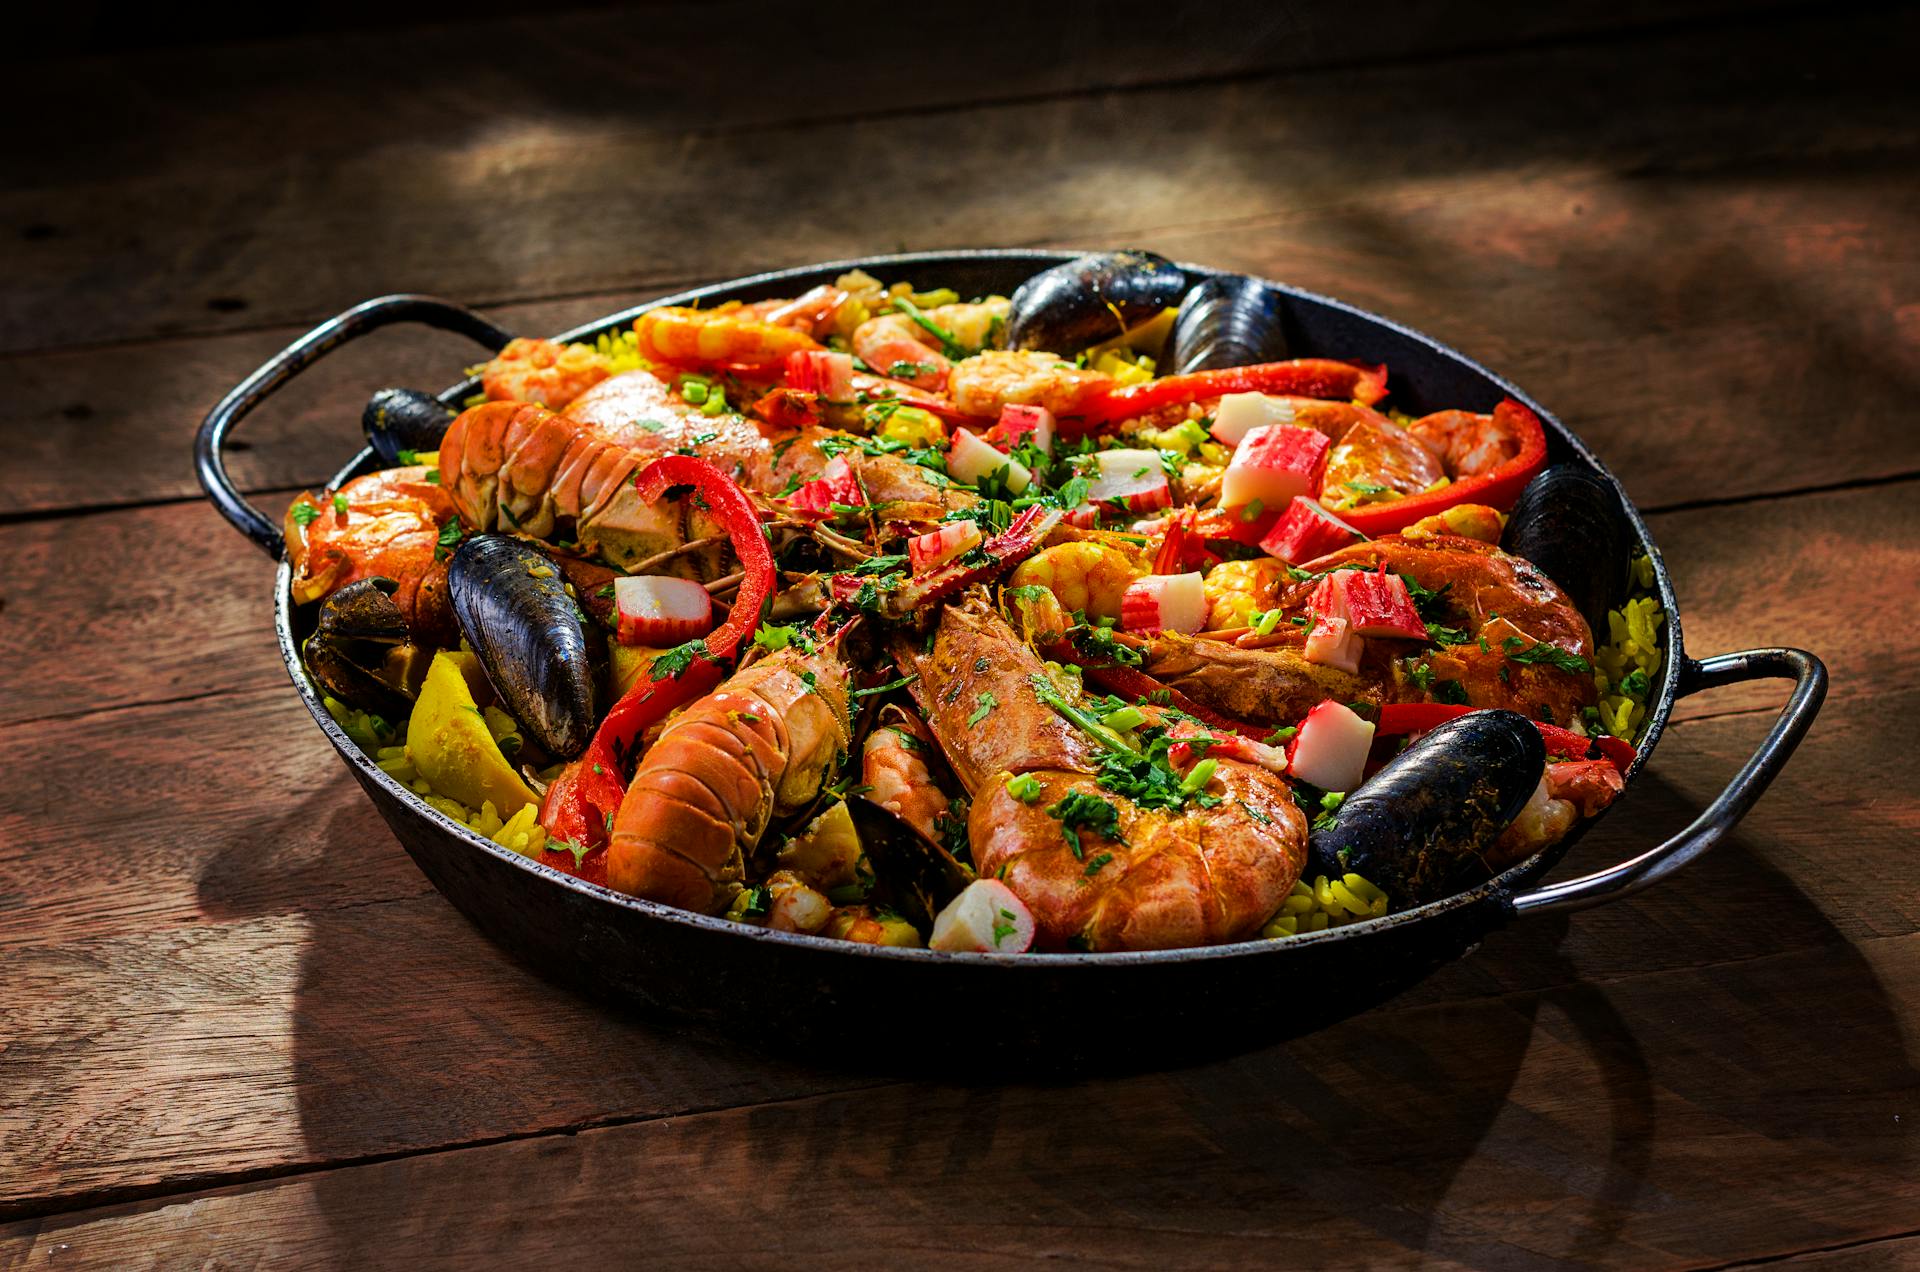 Paella served with shrimps in a wok | Source: Pexels